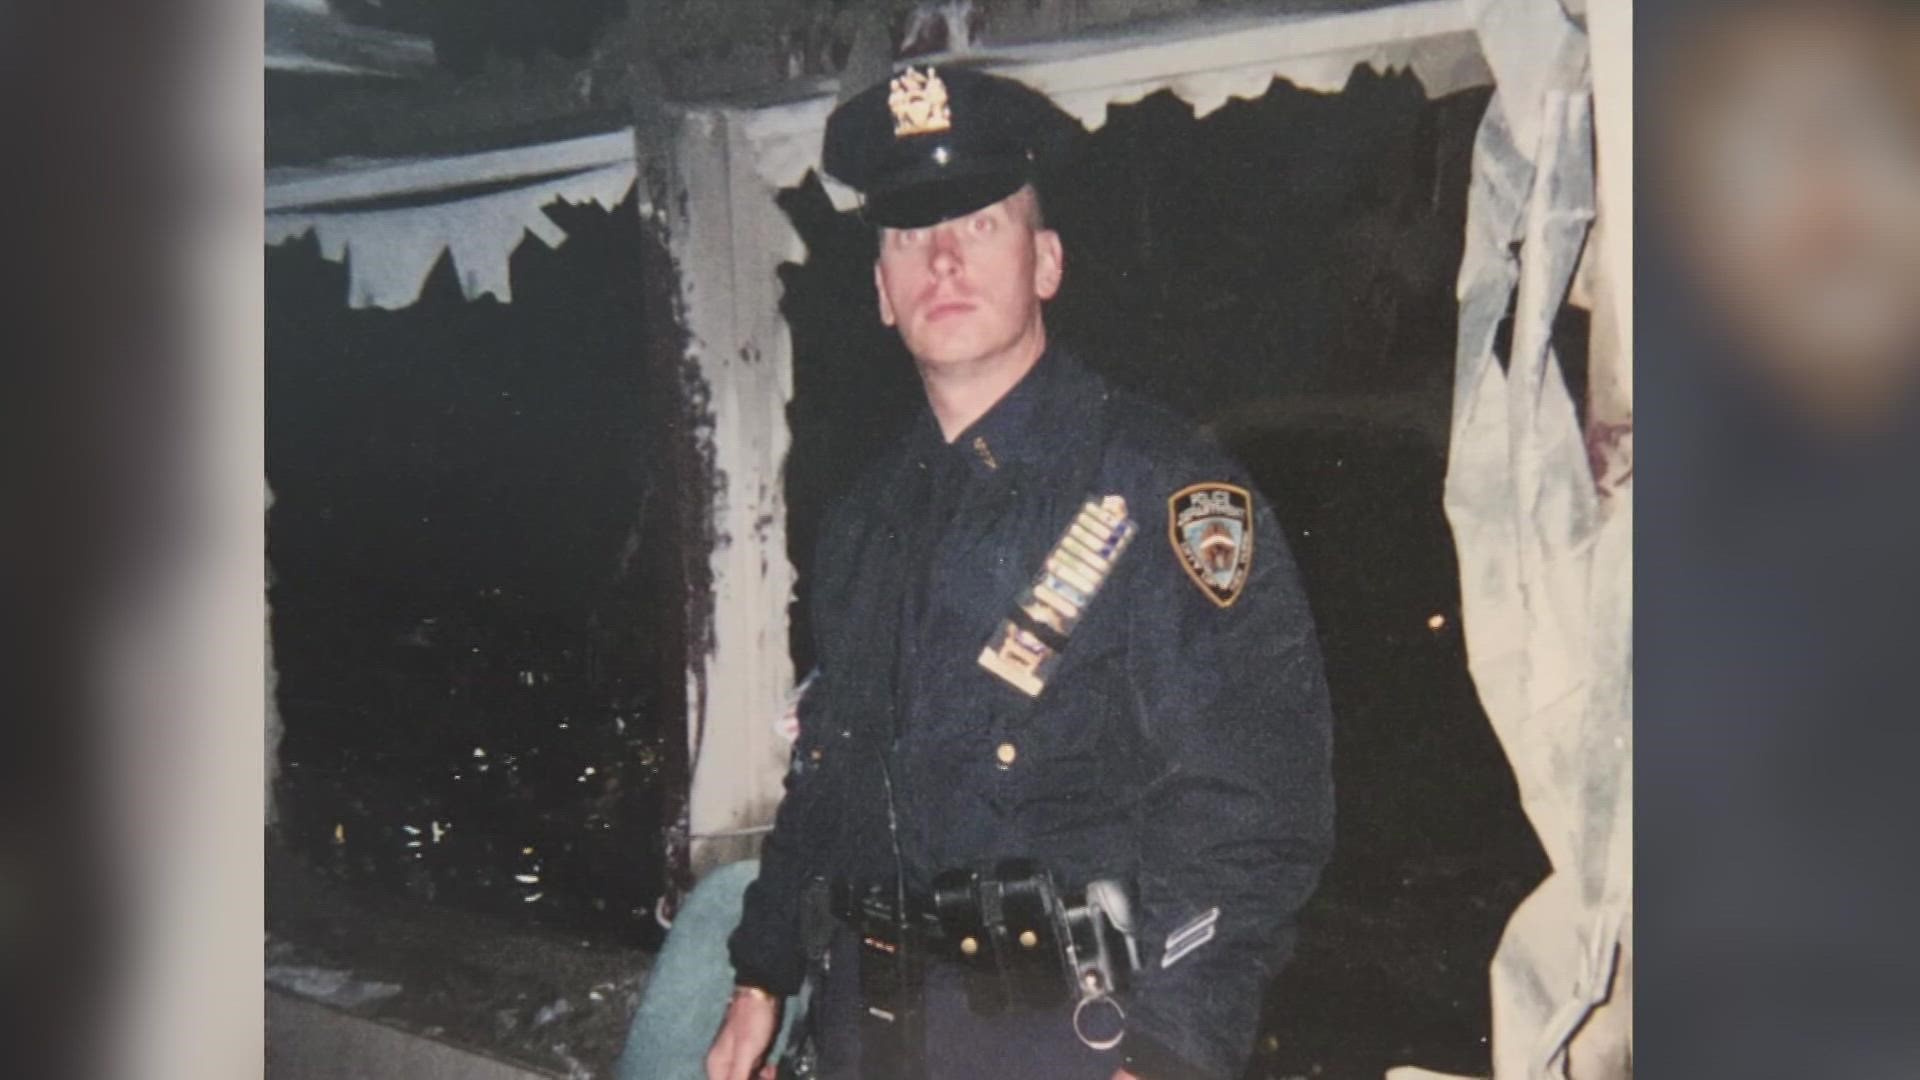 After 21 years, Scott Kamien said the smell of Ground Zero still lingers in his mind.